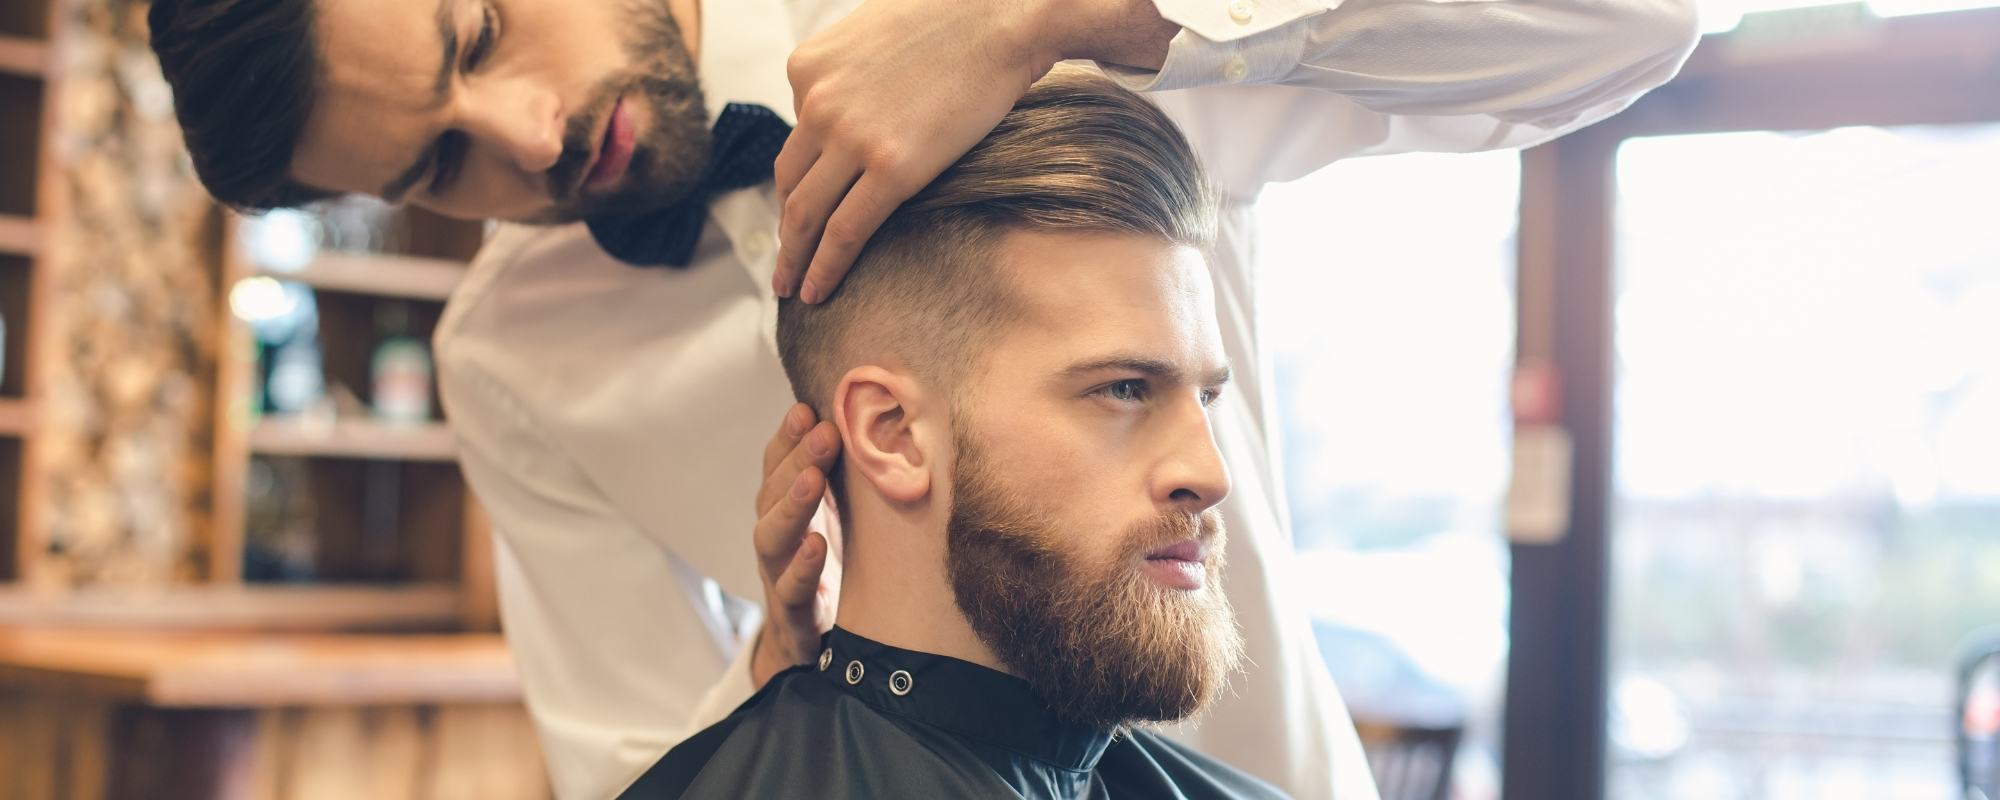 26 Stylish Viking Hairstyles For Men in 2023